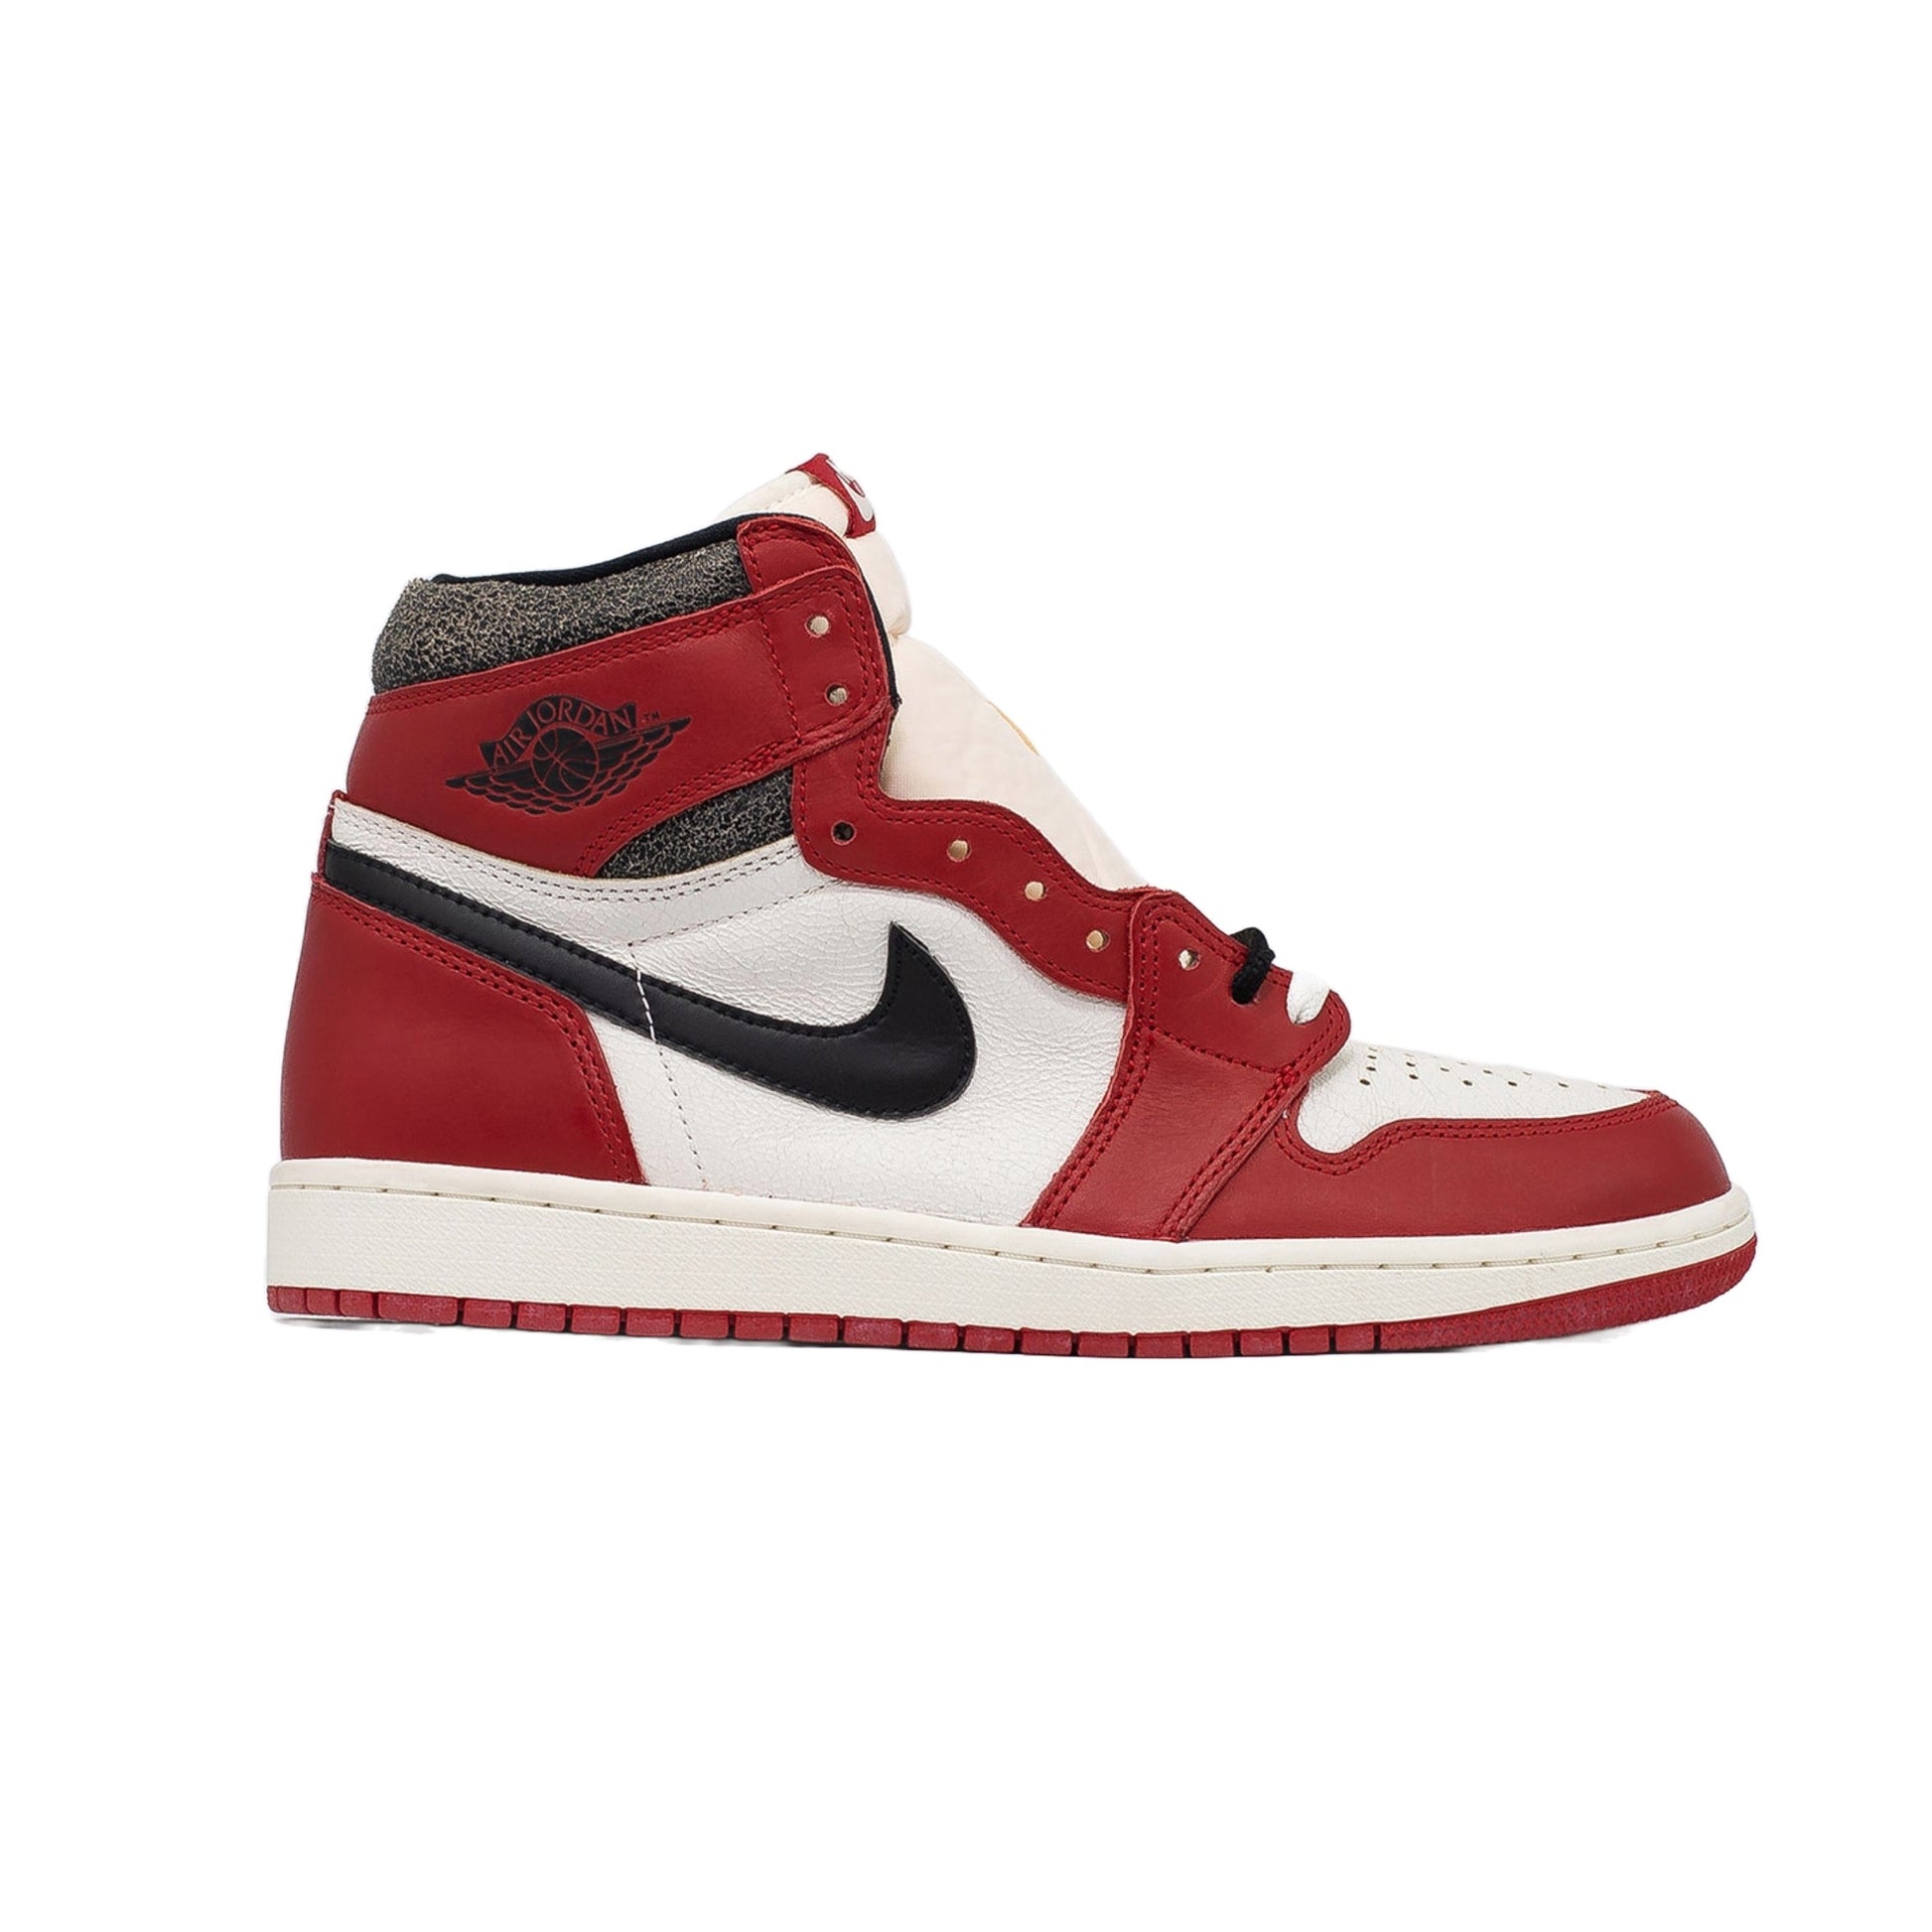 Air chicago jordan 1 High (GS), Chicago Lost And Found